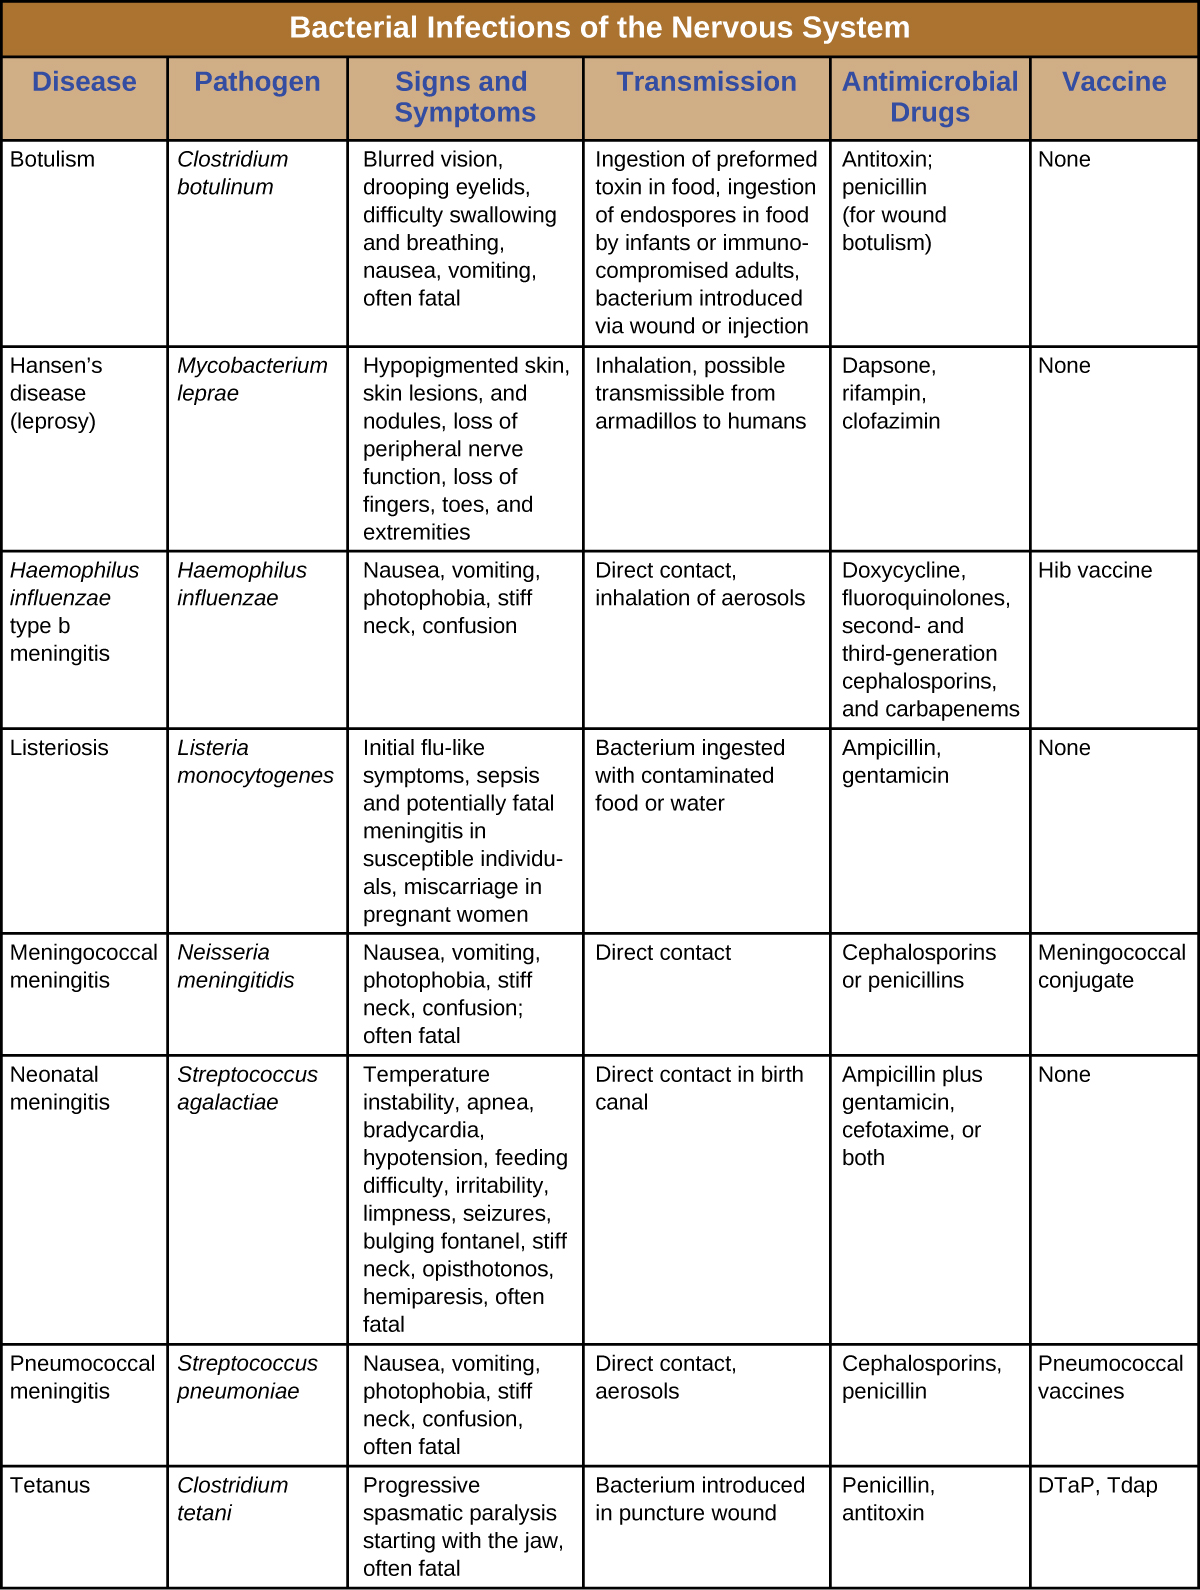 Table summarizing bacterial infections of the nervous system